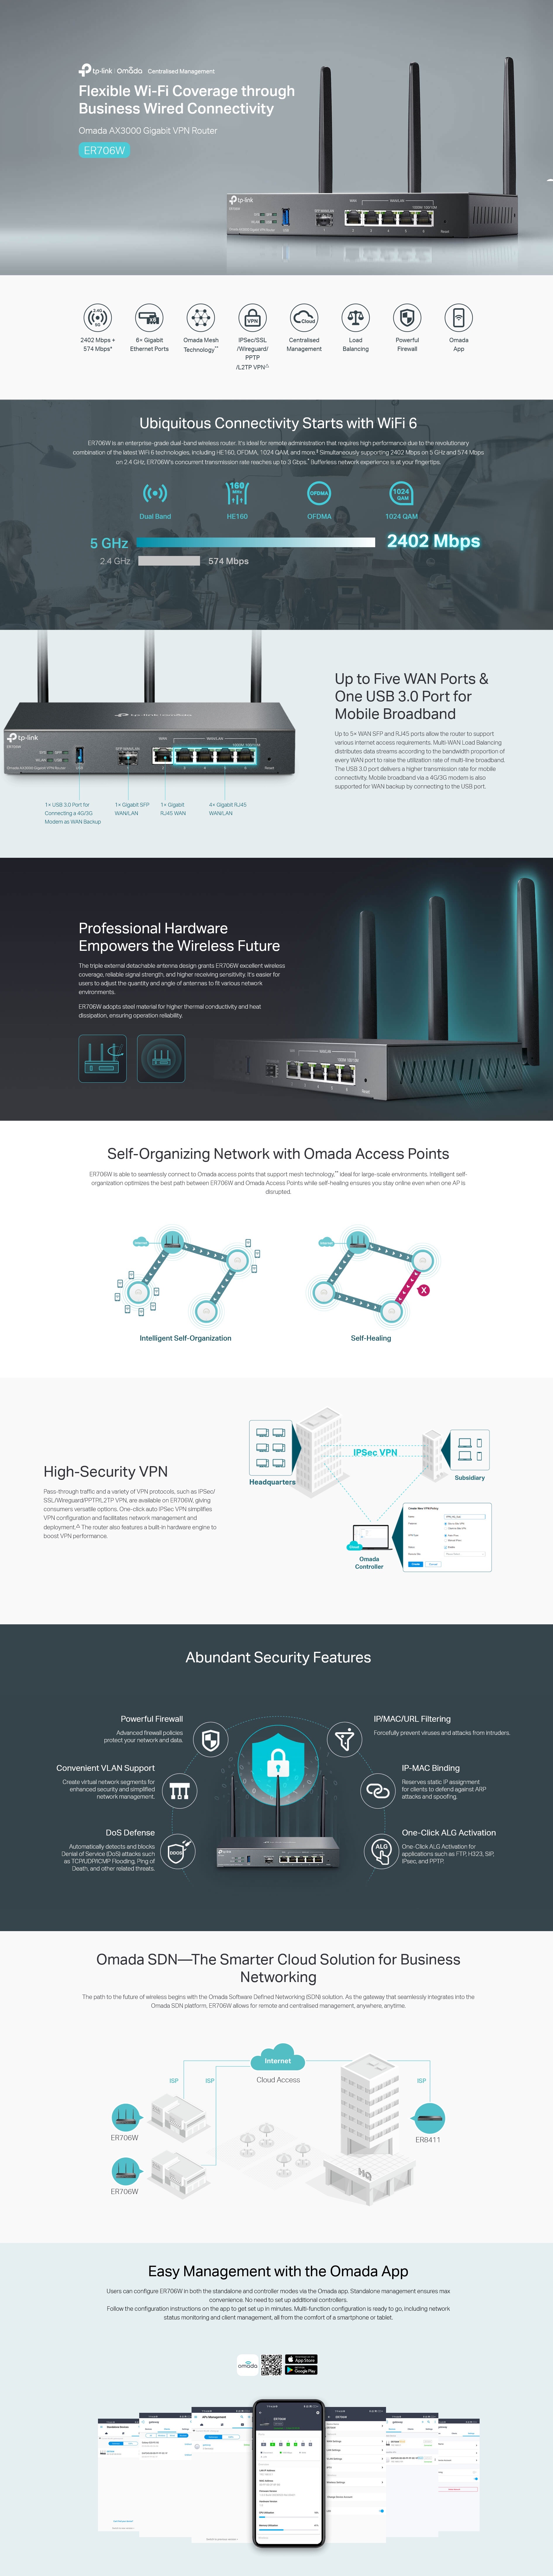 A large marketing image providing additional information about the product TP-Link Omada ER706W - AX3000 Multi-Gigabit Wi-Fi 6 VPN Router - Additional alt info not provided